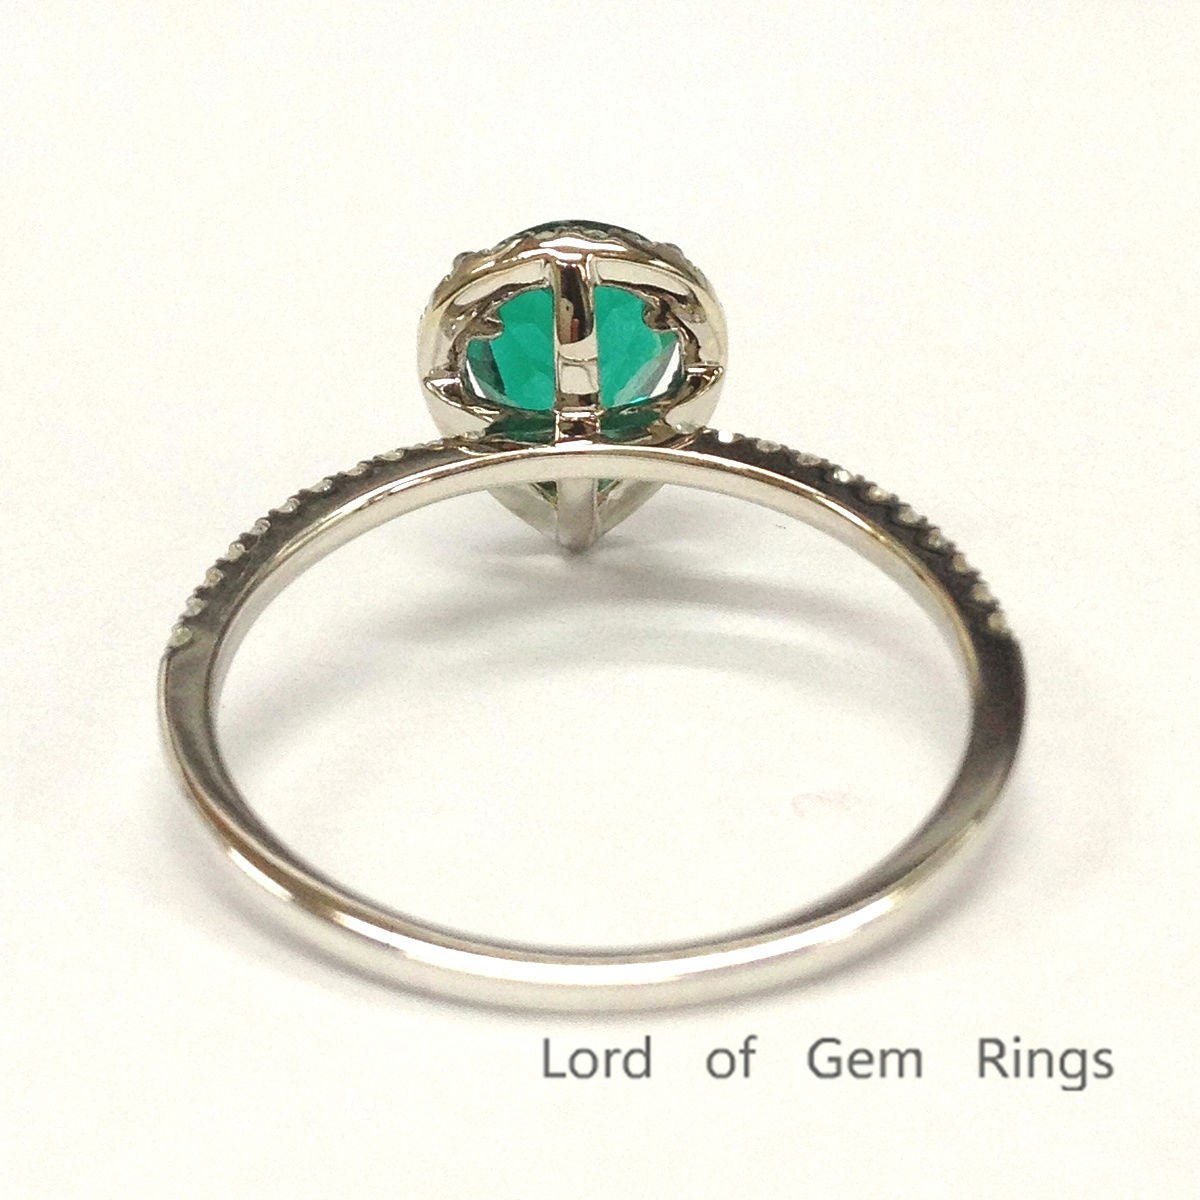 Pear Emerald Diamond Halo Engagement Ring 14K White Gold - Lord of Gem Rings